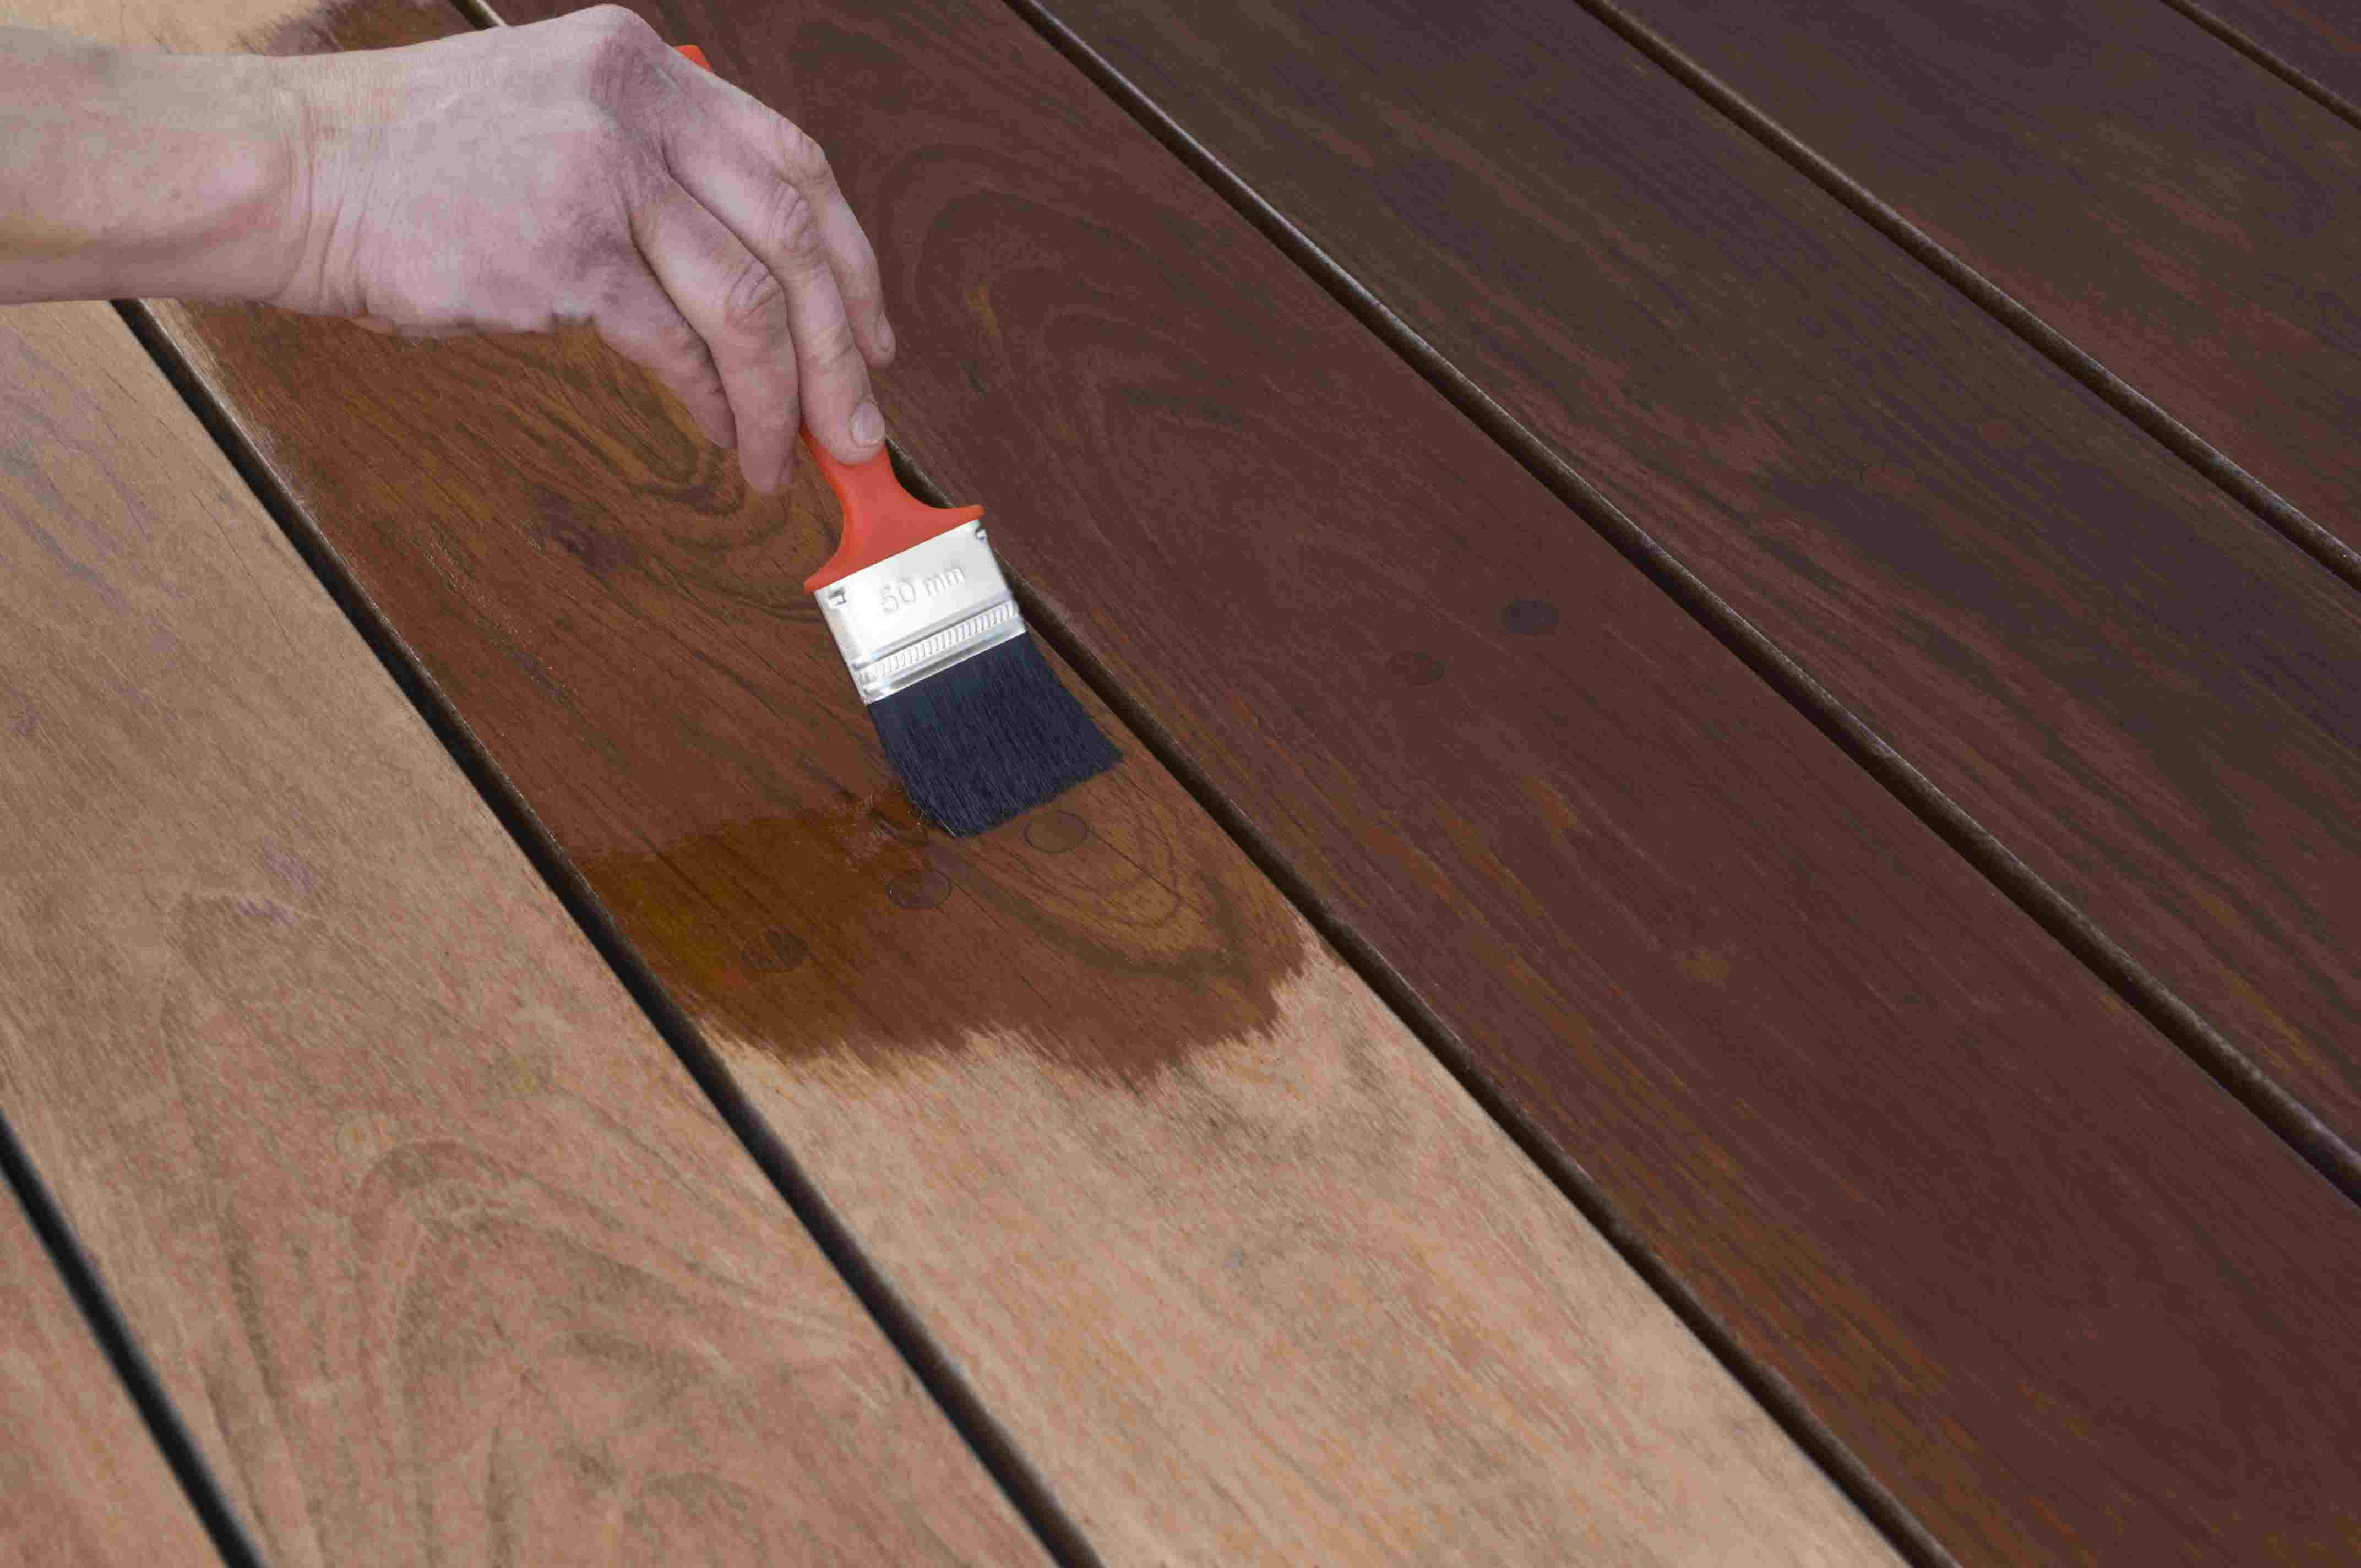 12 Recommended Pc Hardwood Floors Waterbury Ct 2024 free download pc hardwood floors waterbury ct of the best woods for decks and porches with hand with paintbrush staining hardwood